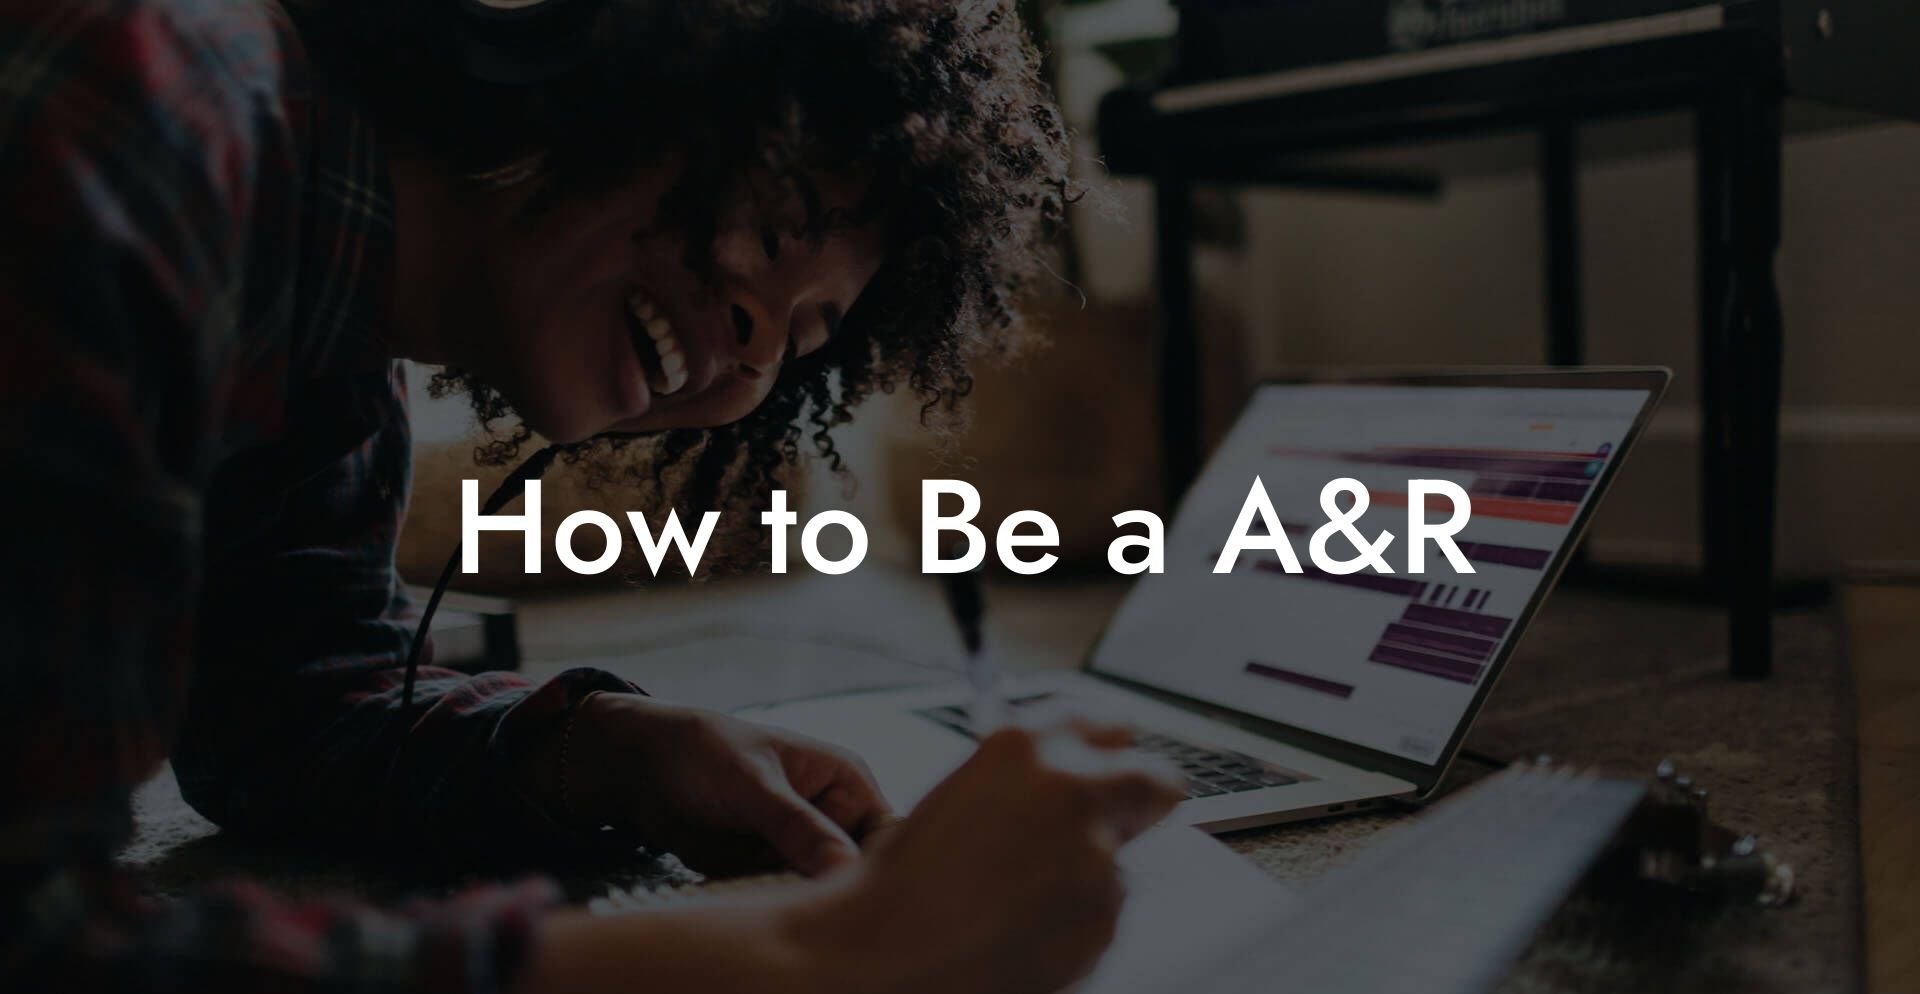 How to Be a A&R